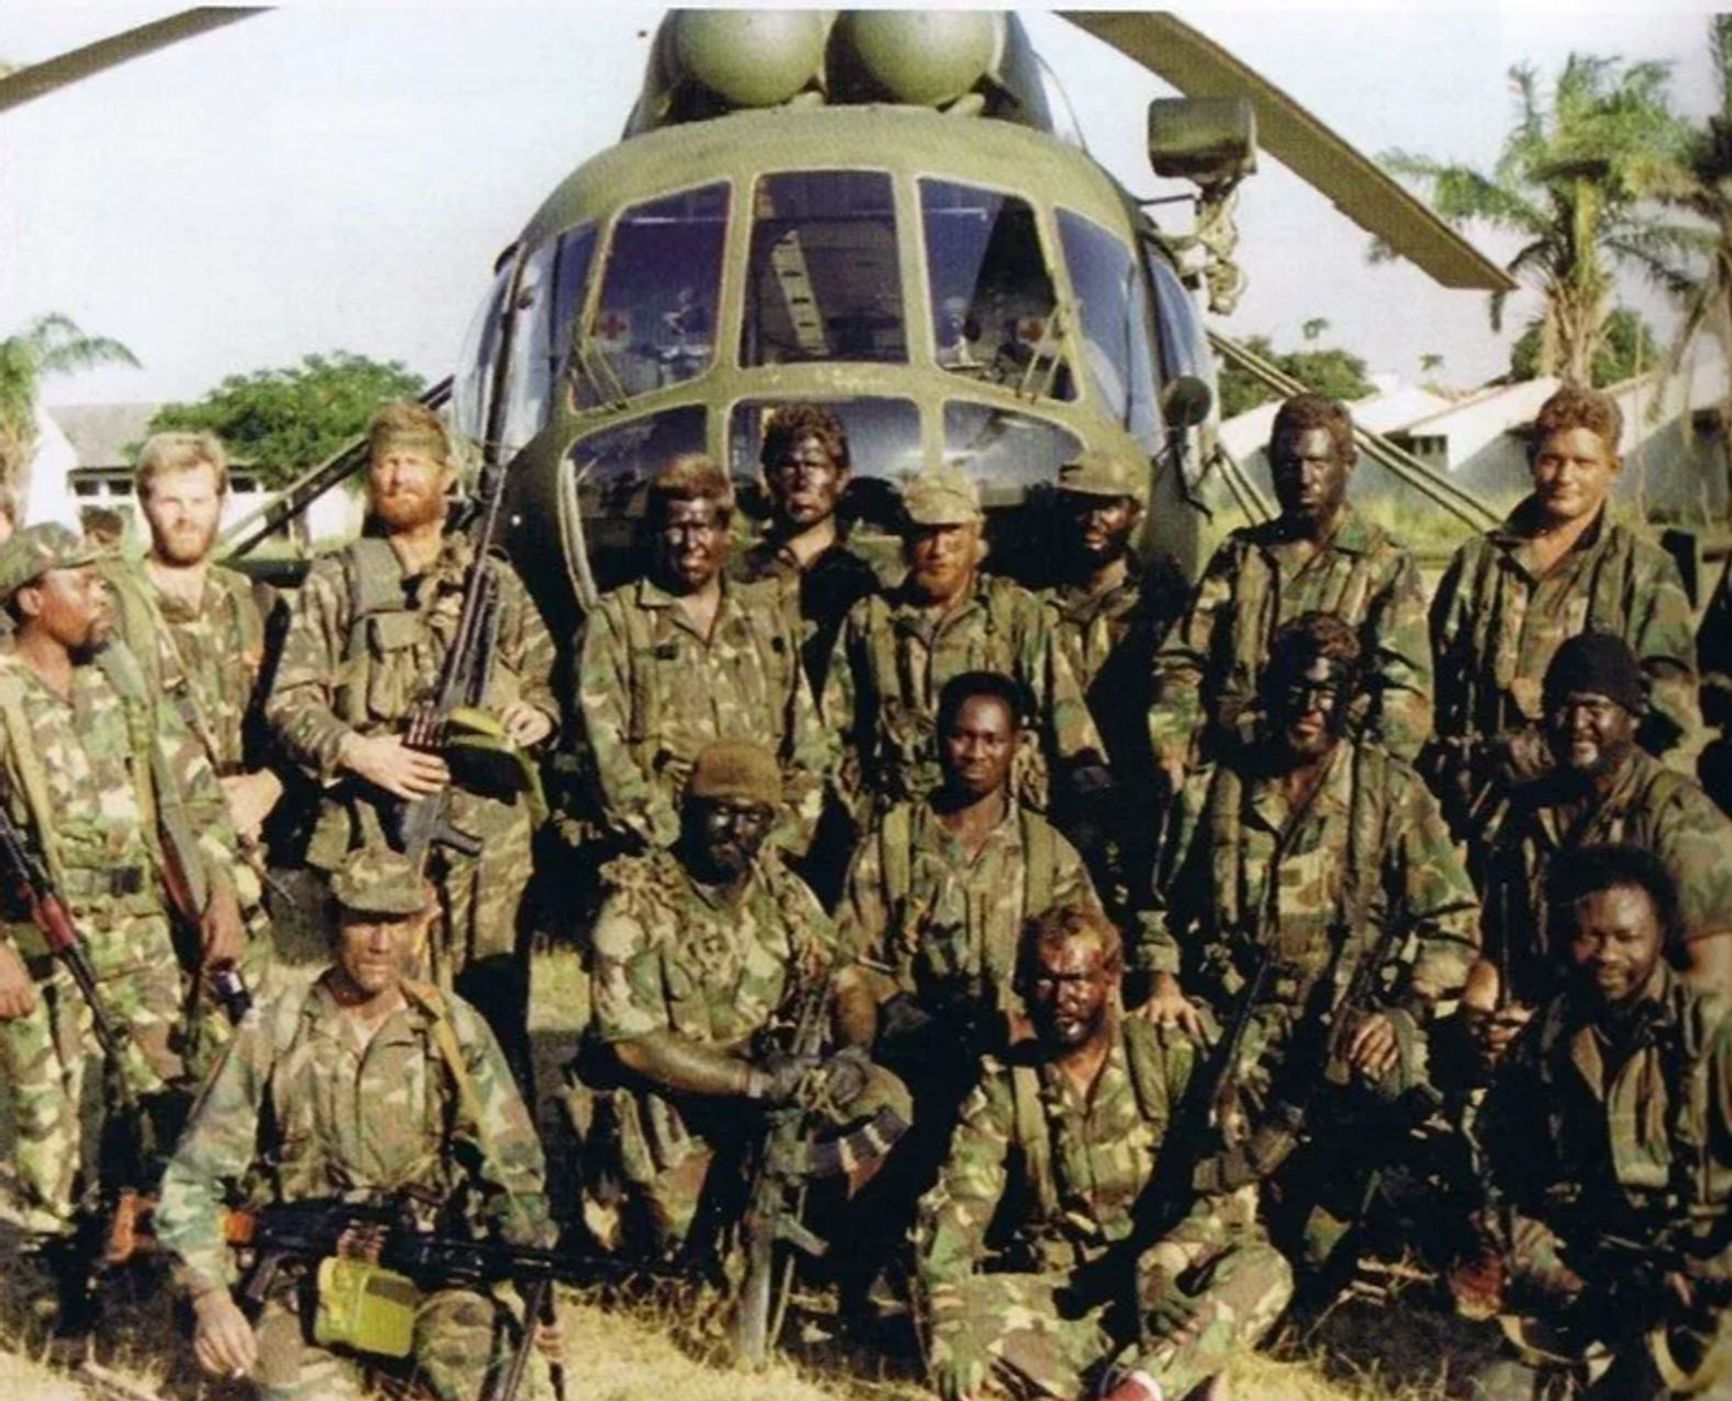 Executive Outcomes employees in Sierra Leone against the backdrop of a Mi-17